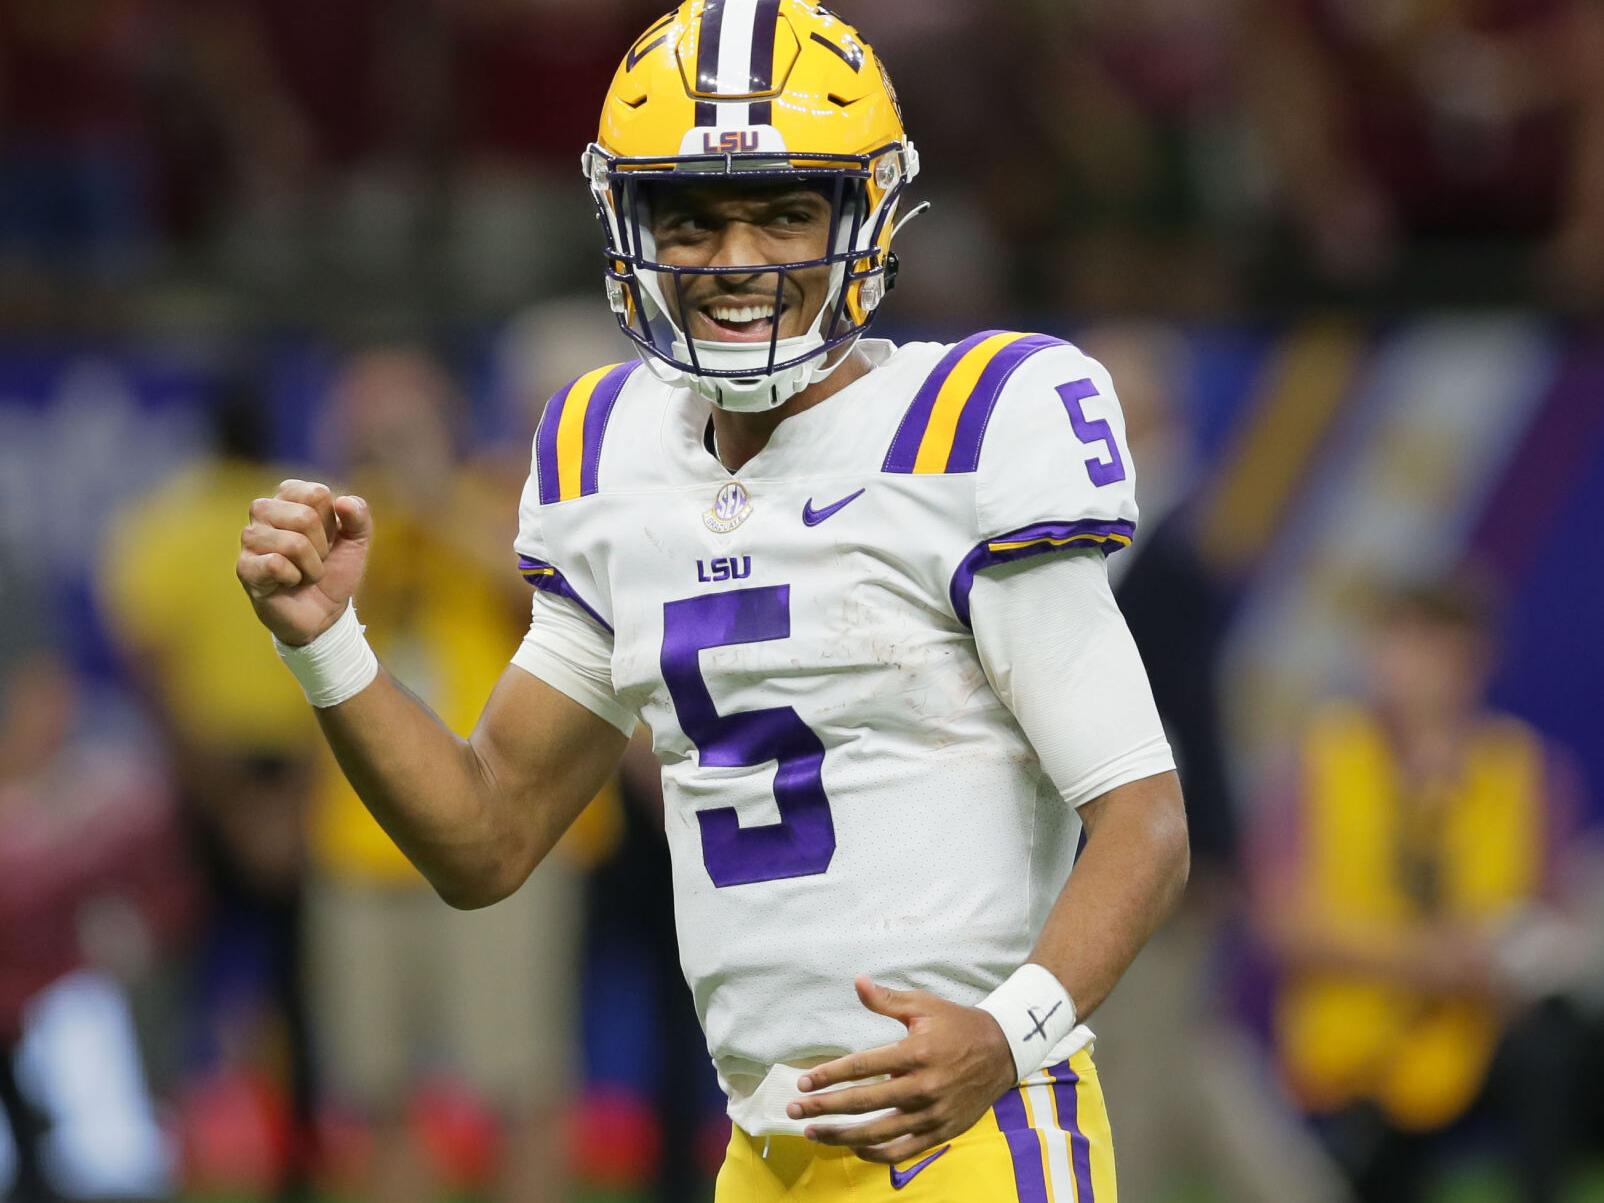 Don't give up on Jayden Daniels. There are good days ahead of  him at LSU